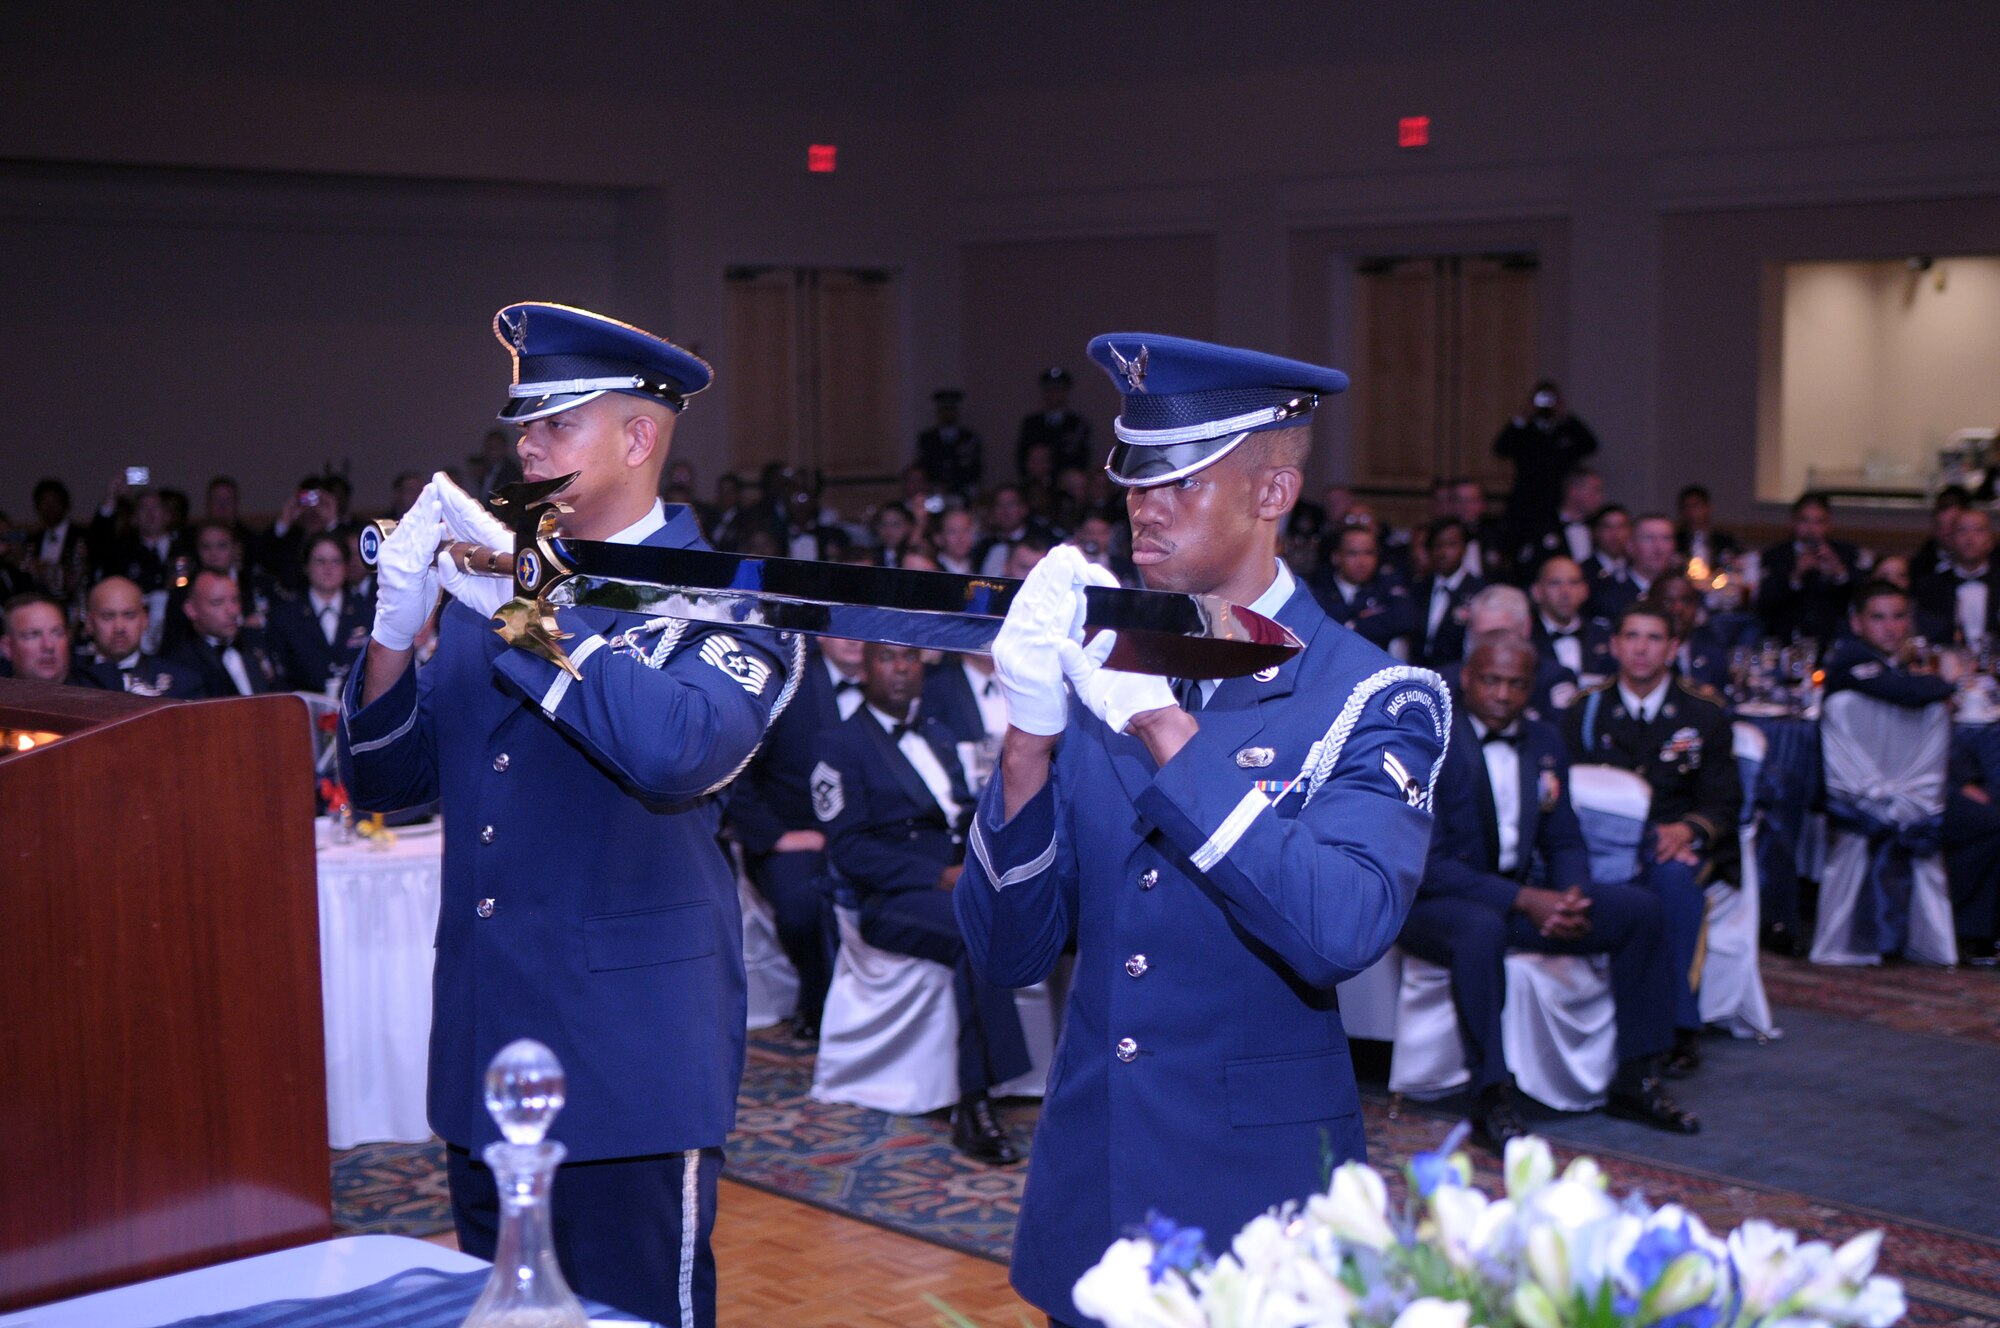 Air Education and Training Command honor guard Airmen, present the AETC command sword to the head table during Gen. Stephen R. Lorenz’s Order of the Sword induction ceremony at the Gateway Club on Lackland AFB, July 16. More than 300 Airmen from across AETC gathered to witness General Lorenz’s induction into the Order of the Sword. The Order of the Sword is the highest honor and tribute noncommissioned officers can bestow upon an individual. (U.S. Air Force photo/Joel Martinez)